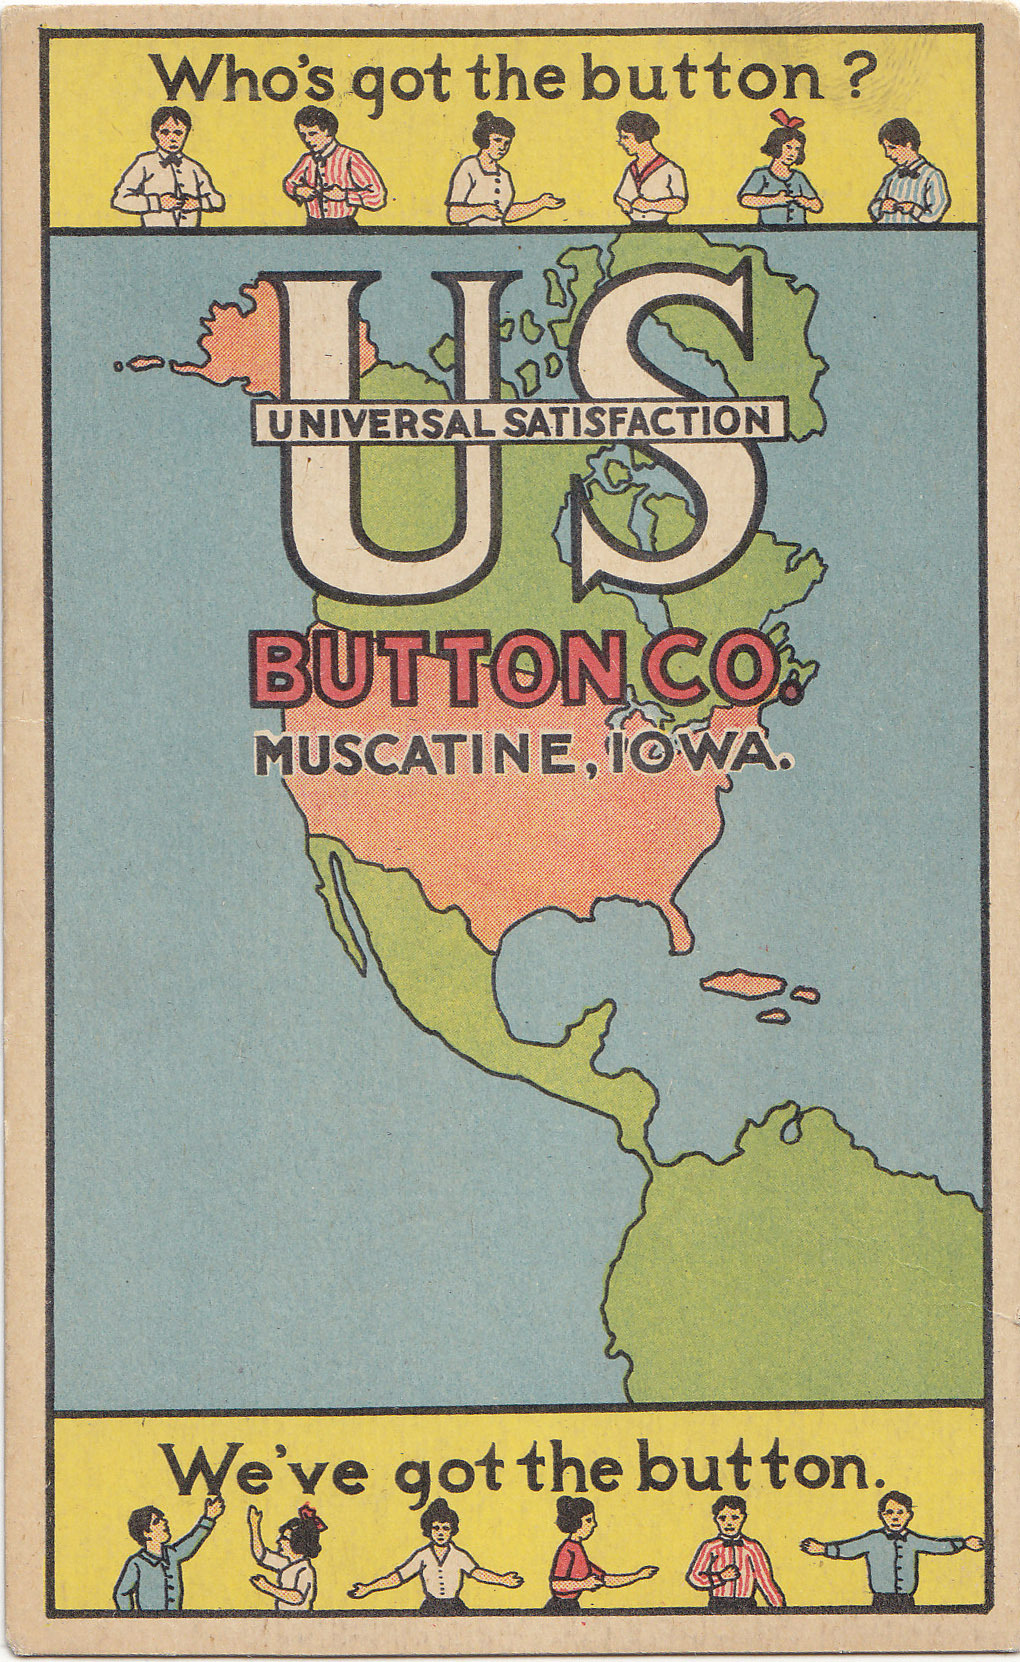 Muscatine's Pearl Button Button Industry Image